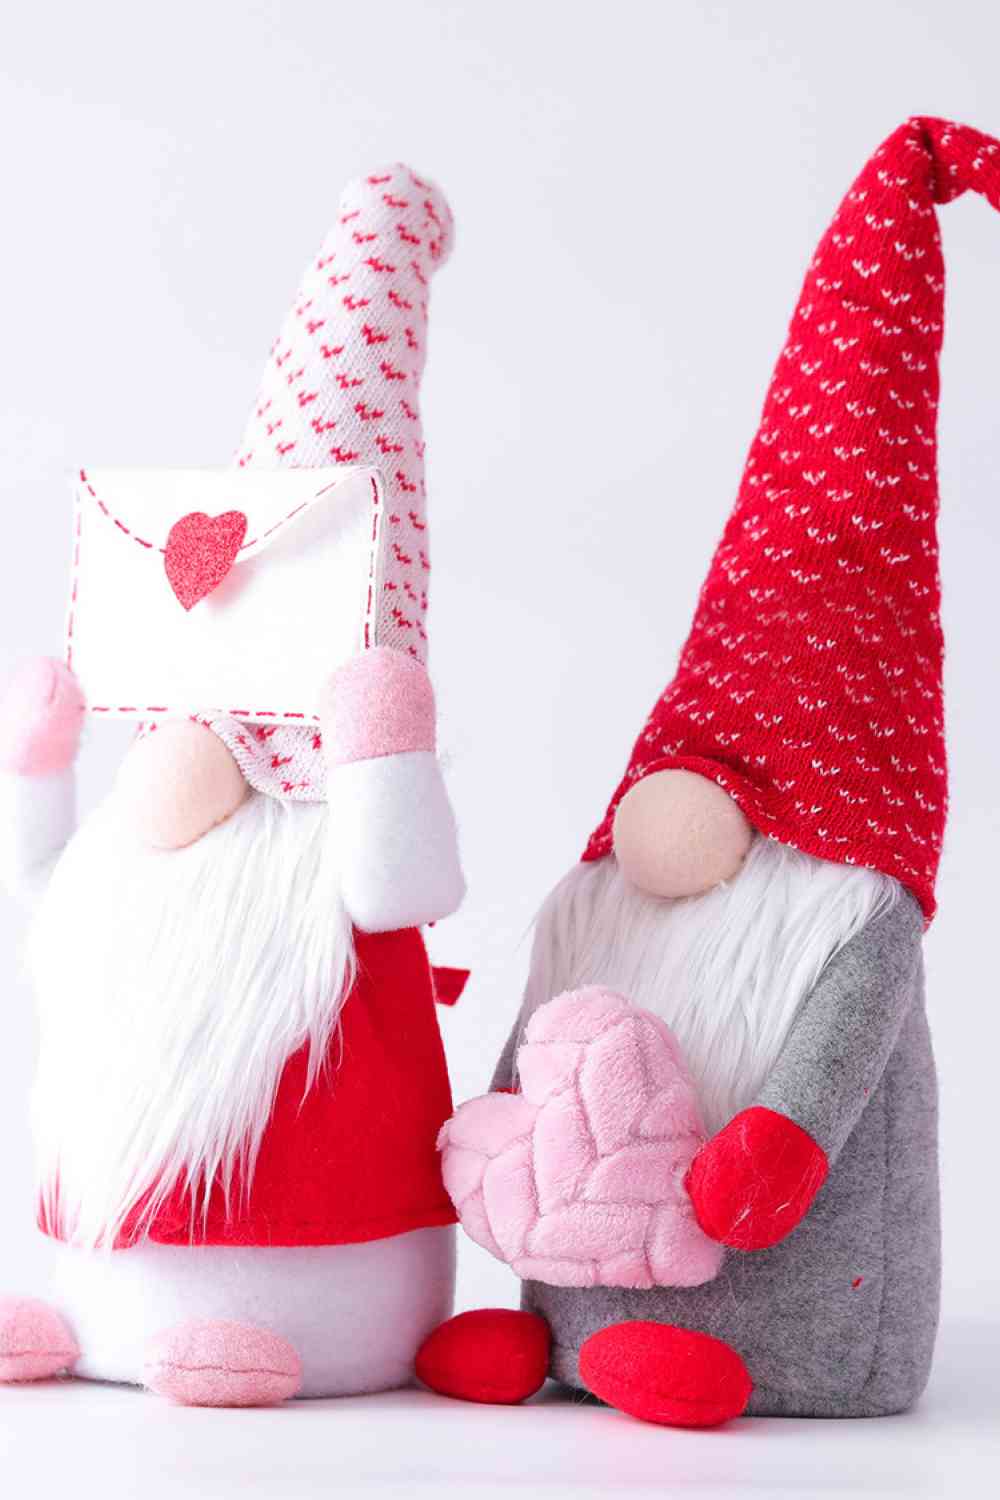 GNOMES - LOVE, HEART, SHARE WITH LOVED ONES AND/OR COLLECT THEM!!